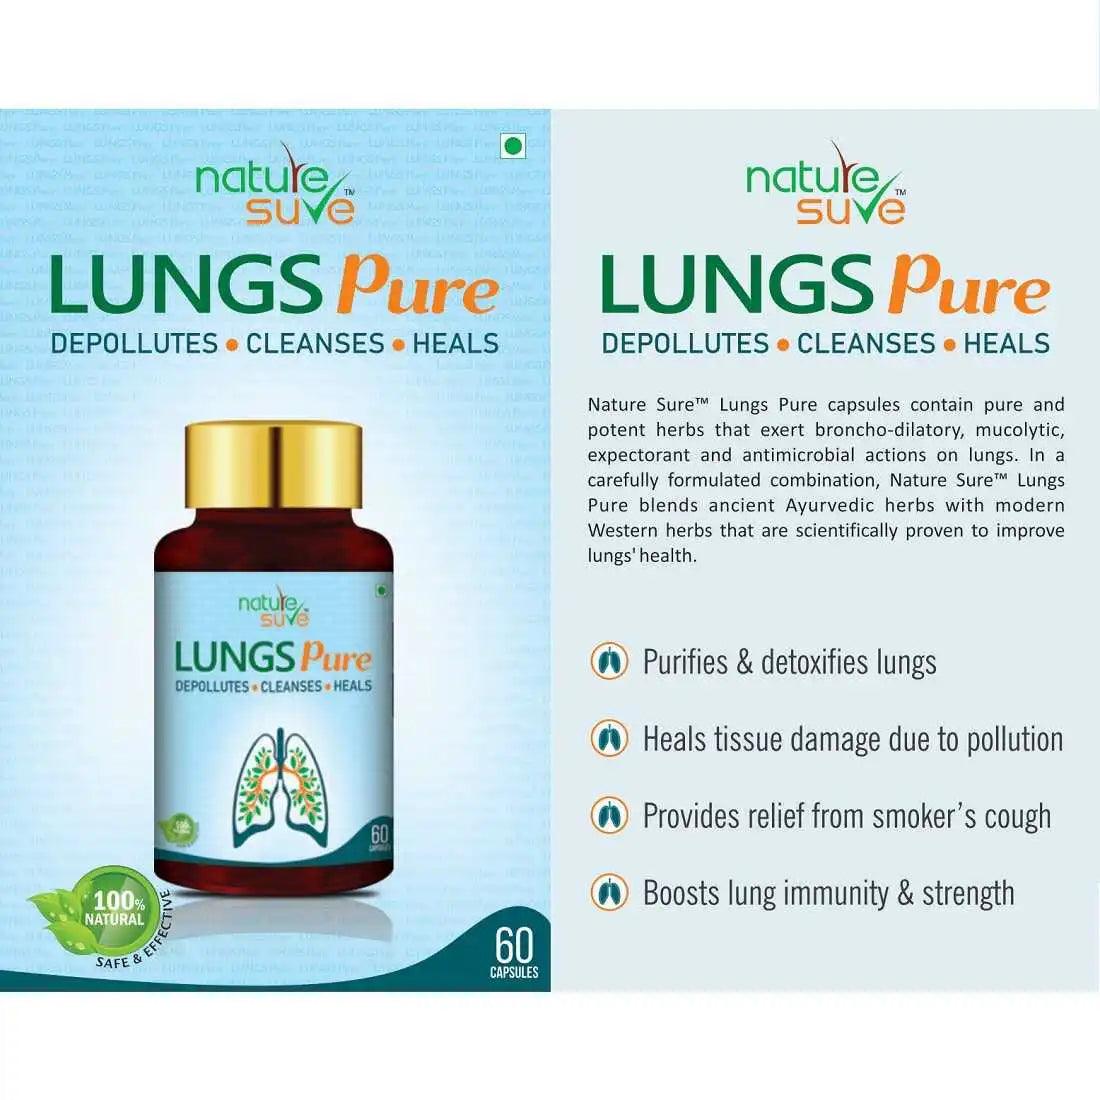 Nature Sure Lungs Pure Help Provide Relief From Smoker's Cough - everteen-neud.com